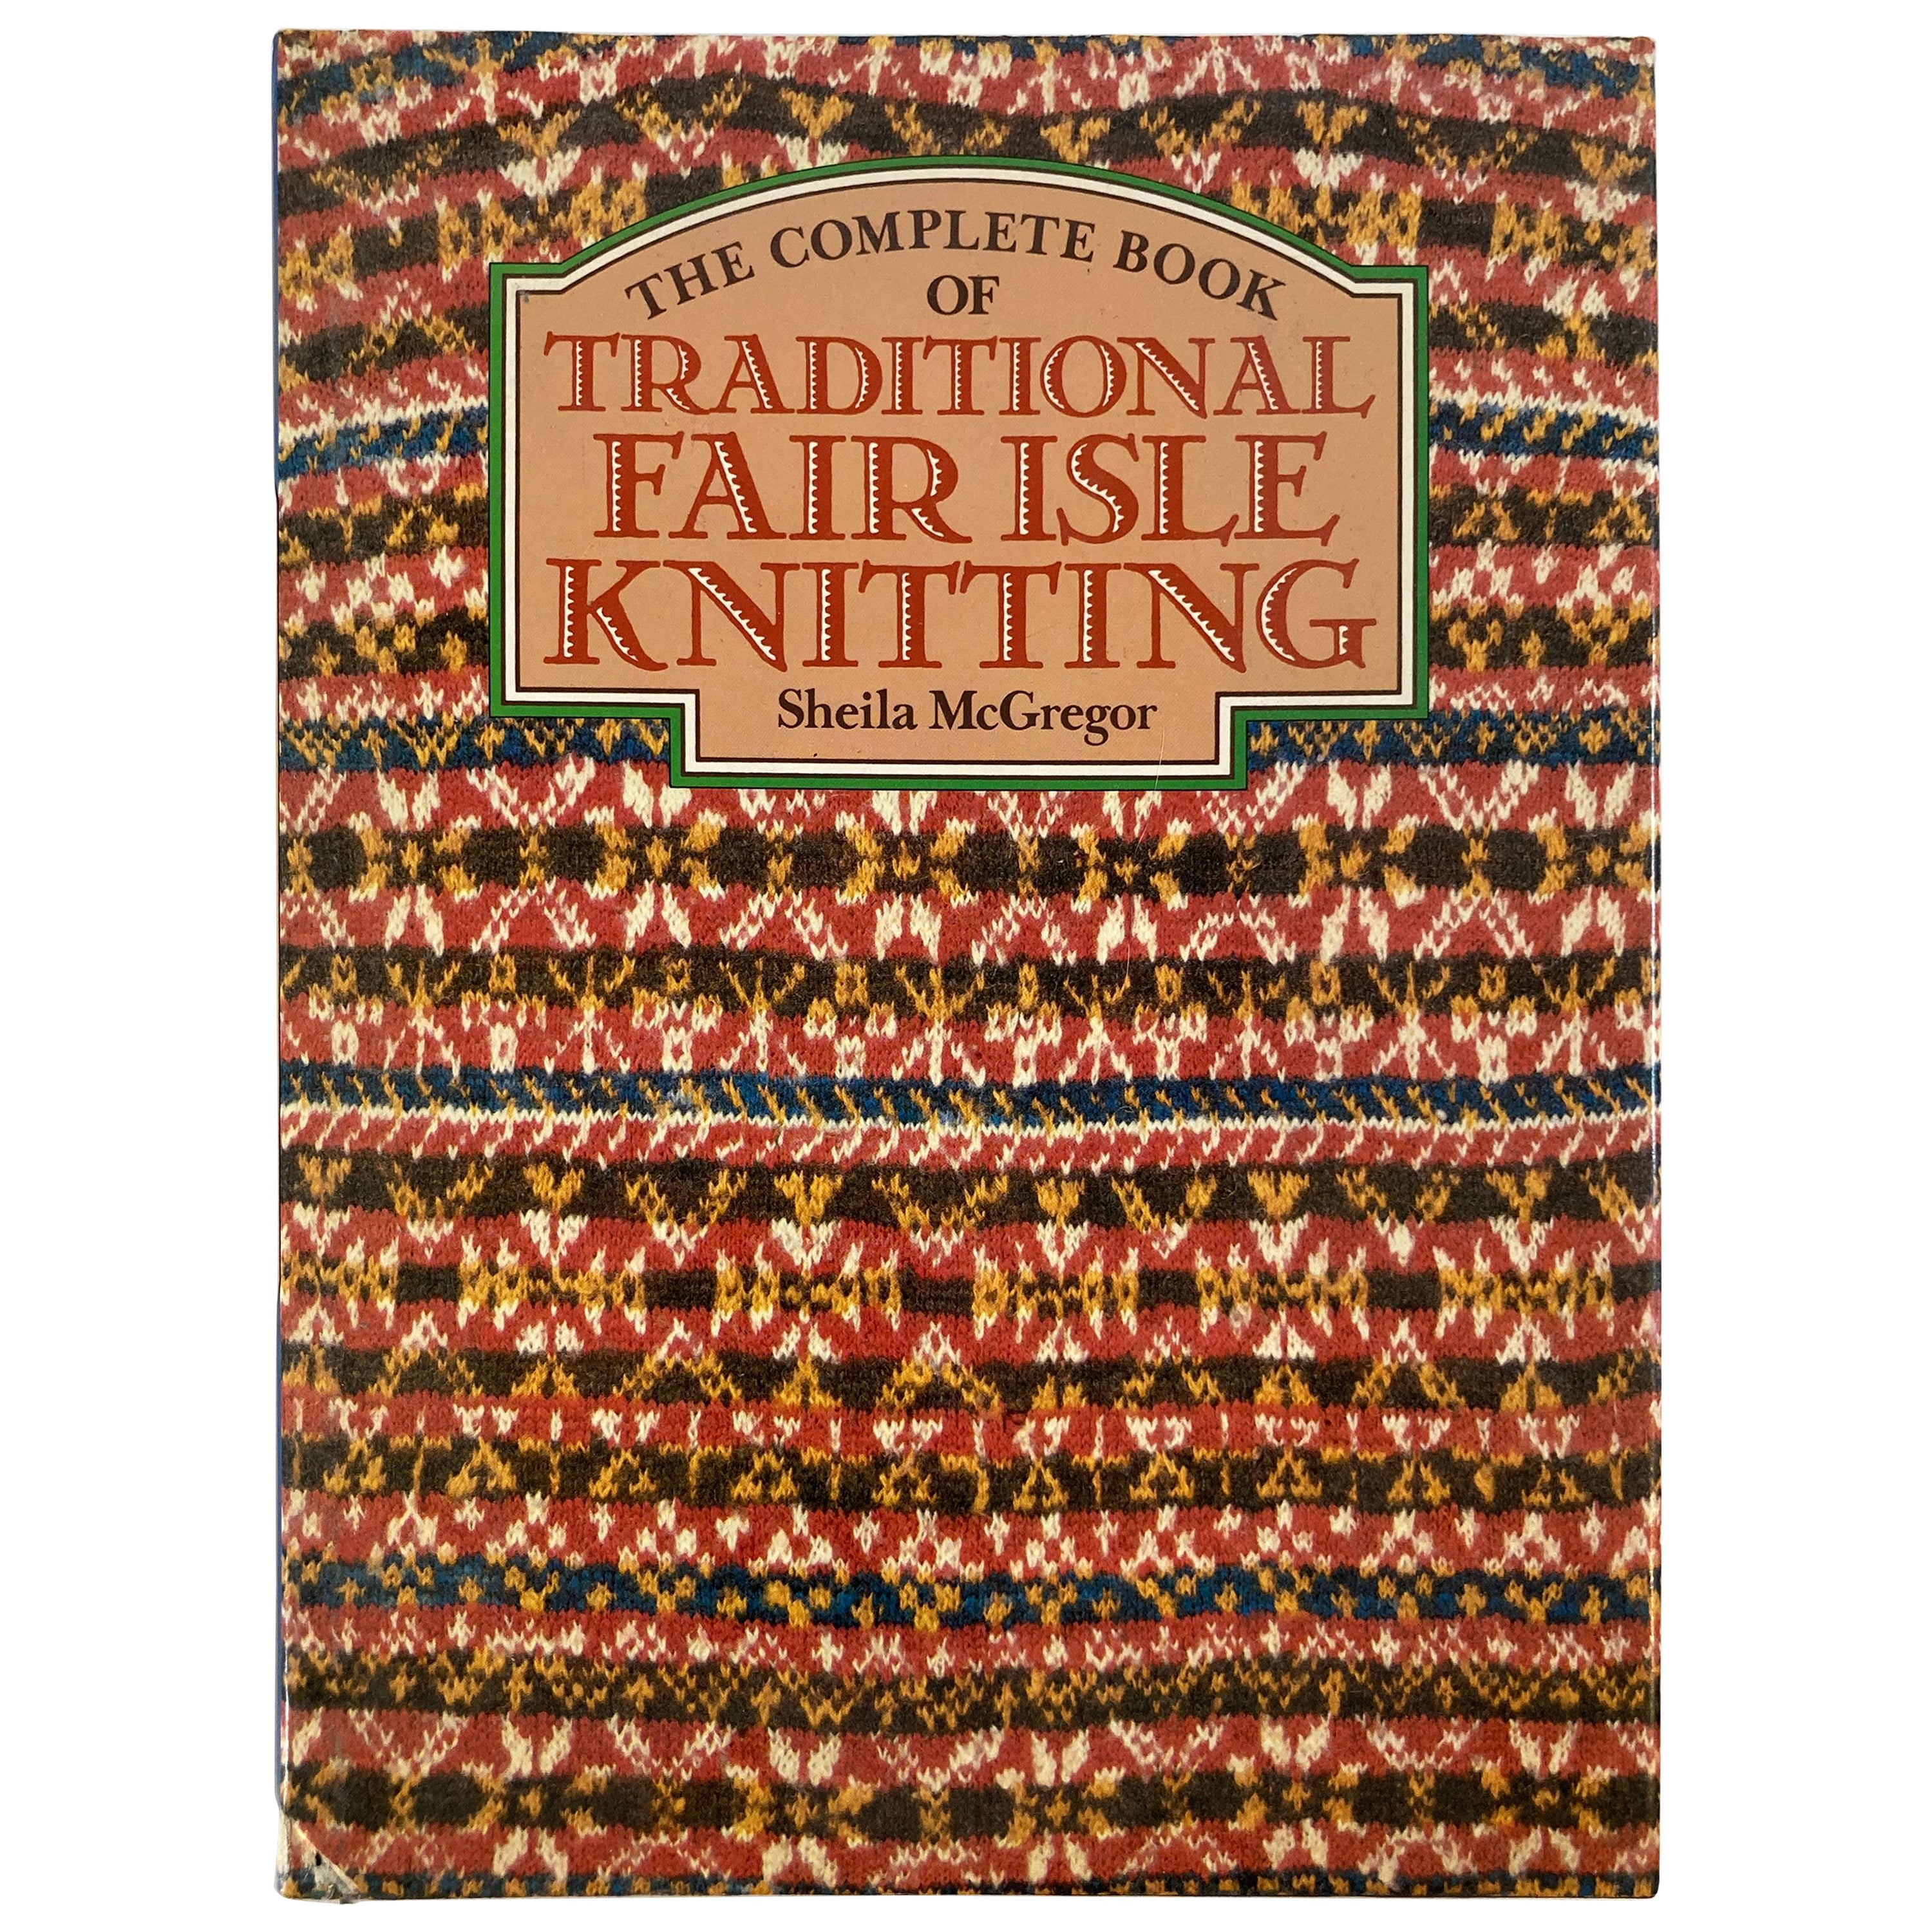 Complete Book of Traditional Fair Isle Knitting von McGregor, Sheila 1982